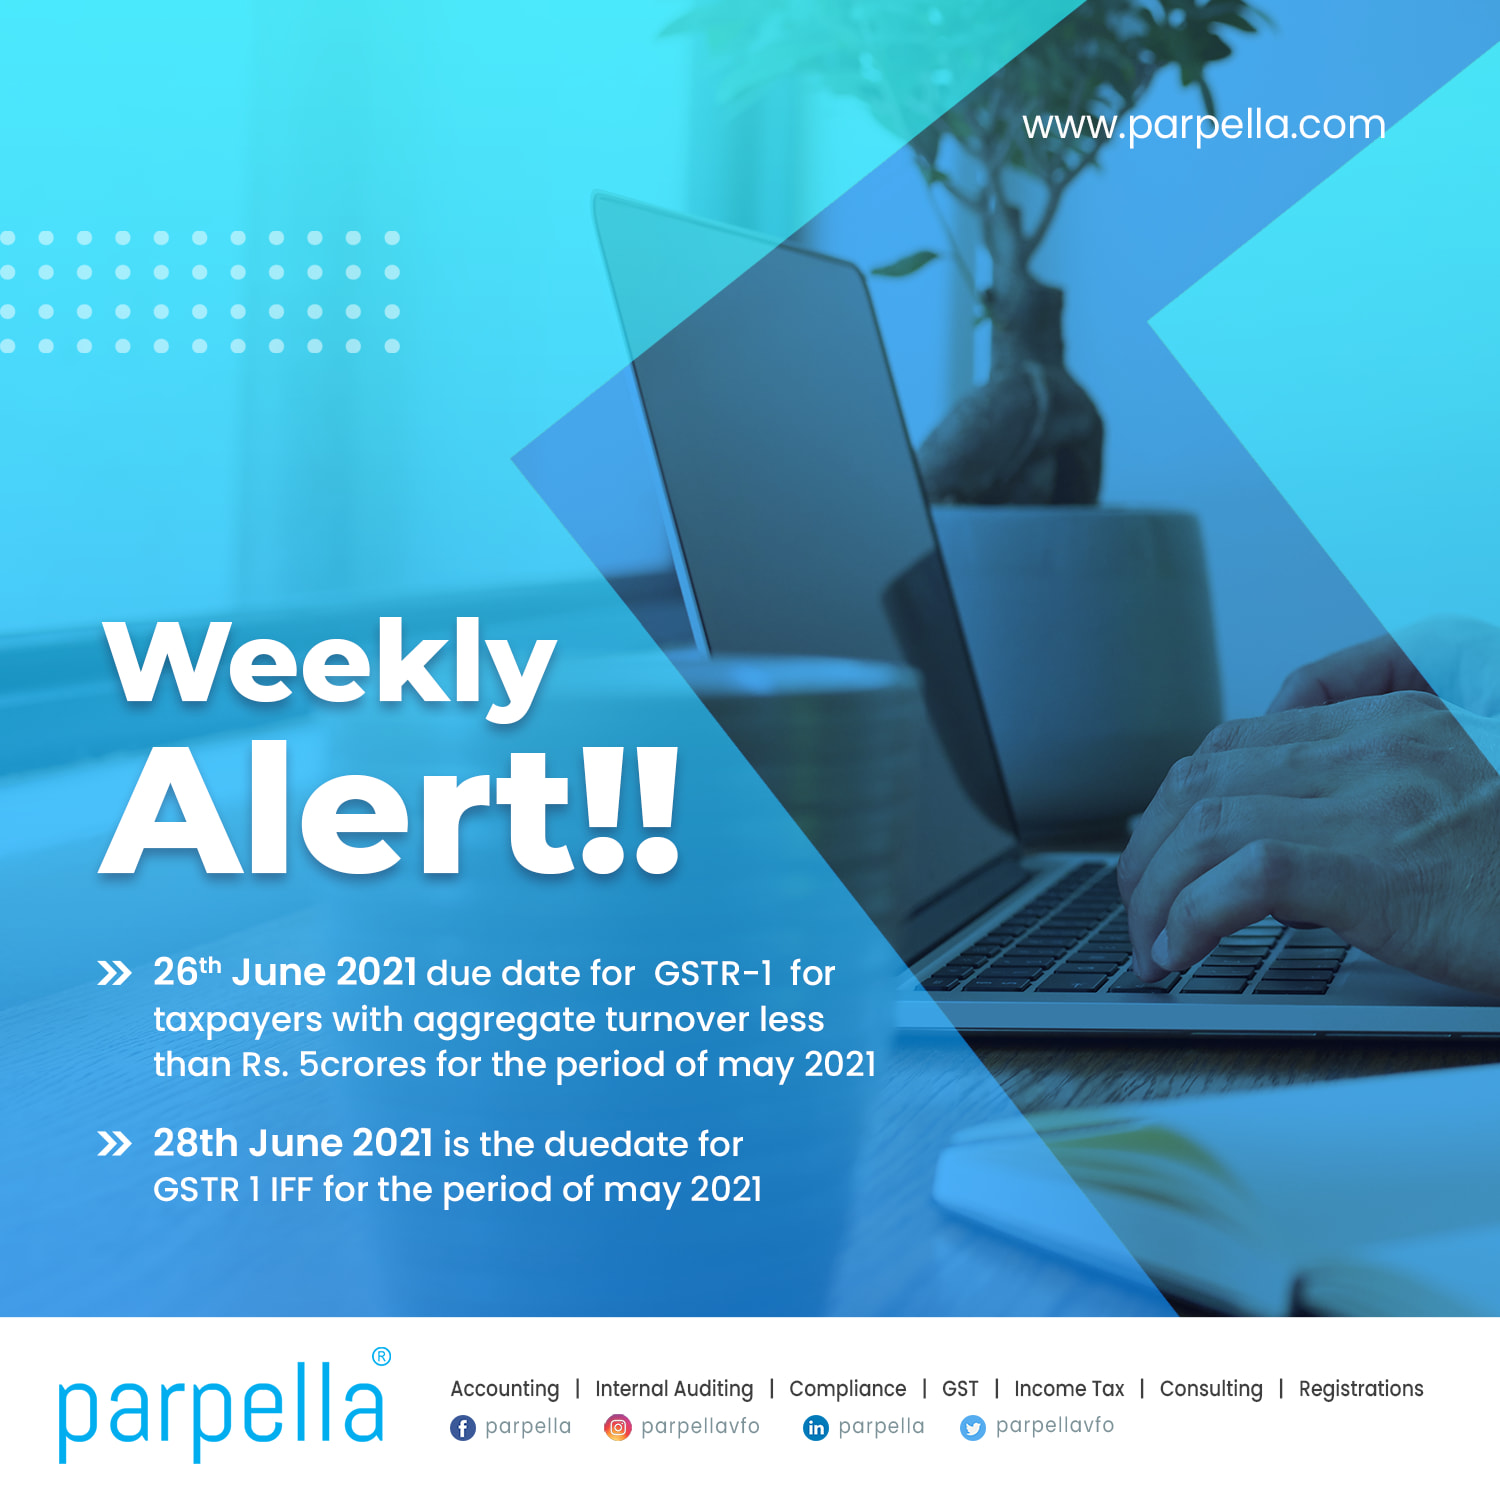 Parpella Professional Services | Accounting Services